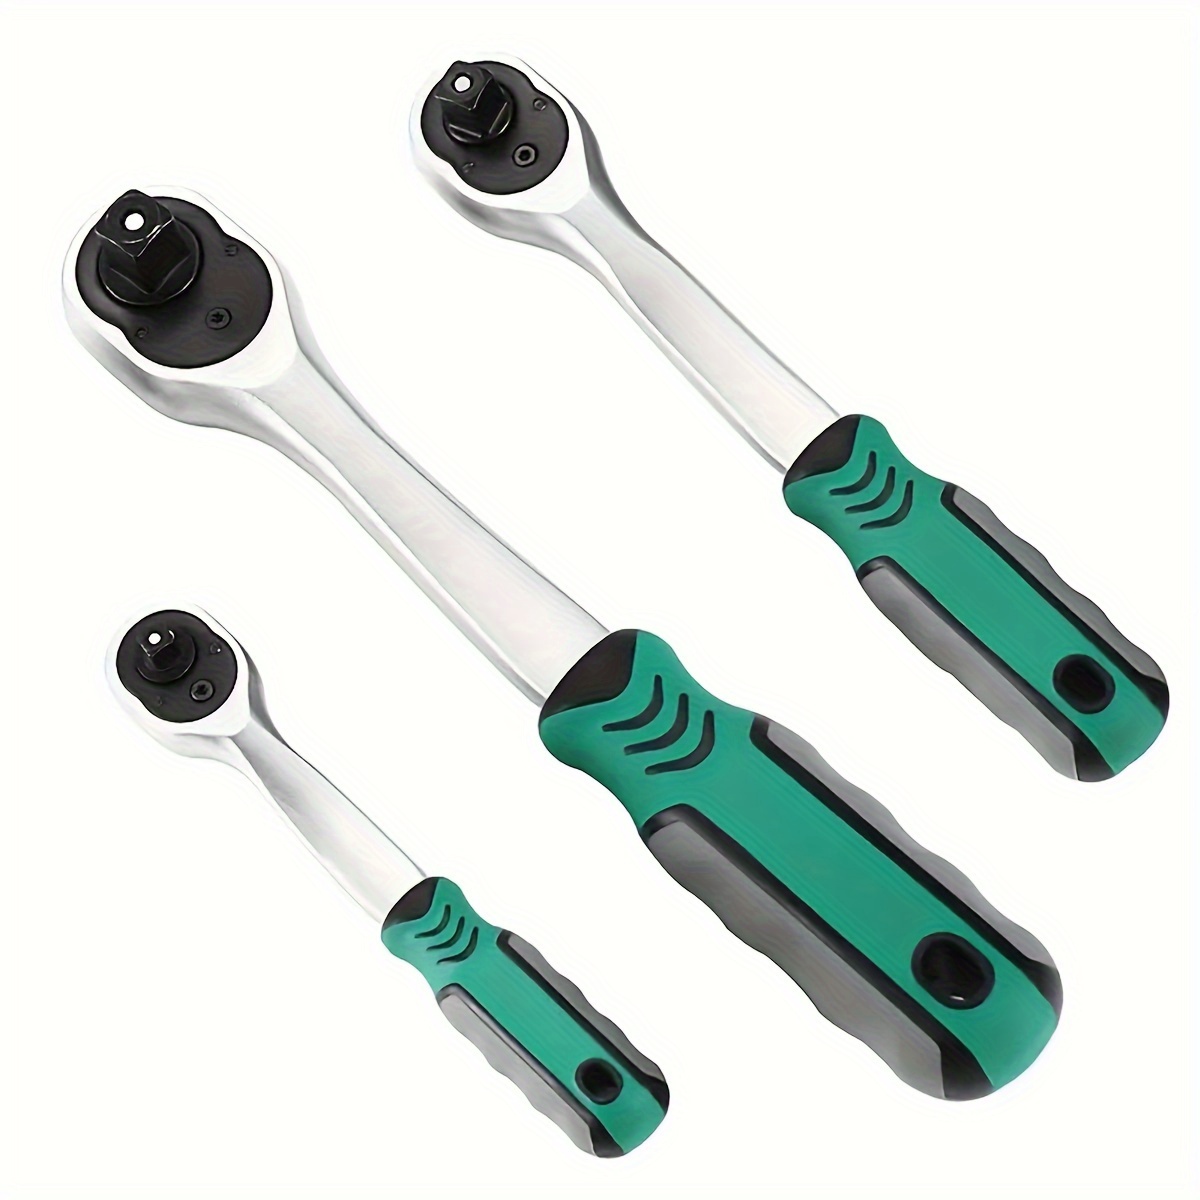 

1pc Ratchet Wrench, 1/4inch, 3/8inch, 1/2inch Drive Socket Ratchet, 72-tooth Quick-release Spanner, Reversible Gear Torque Spanner, Mechanical Tool, Professional Repair Tool